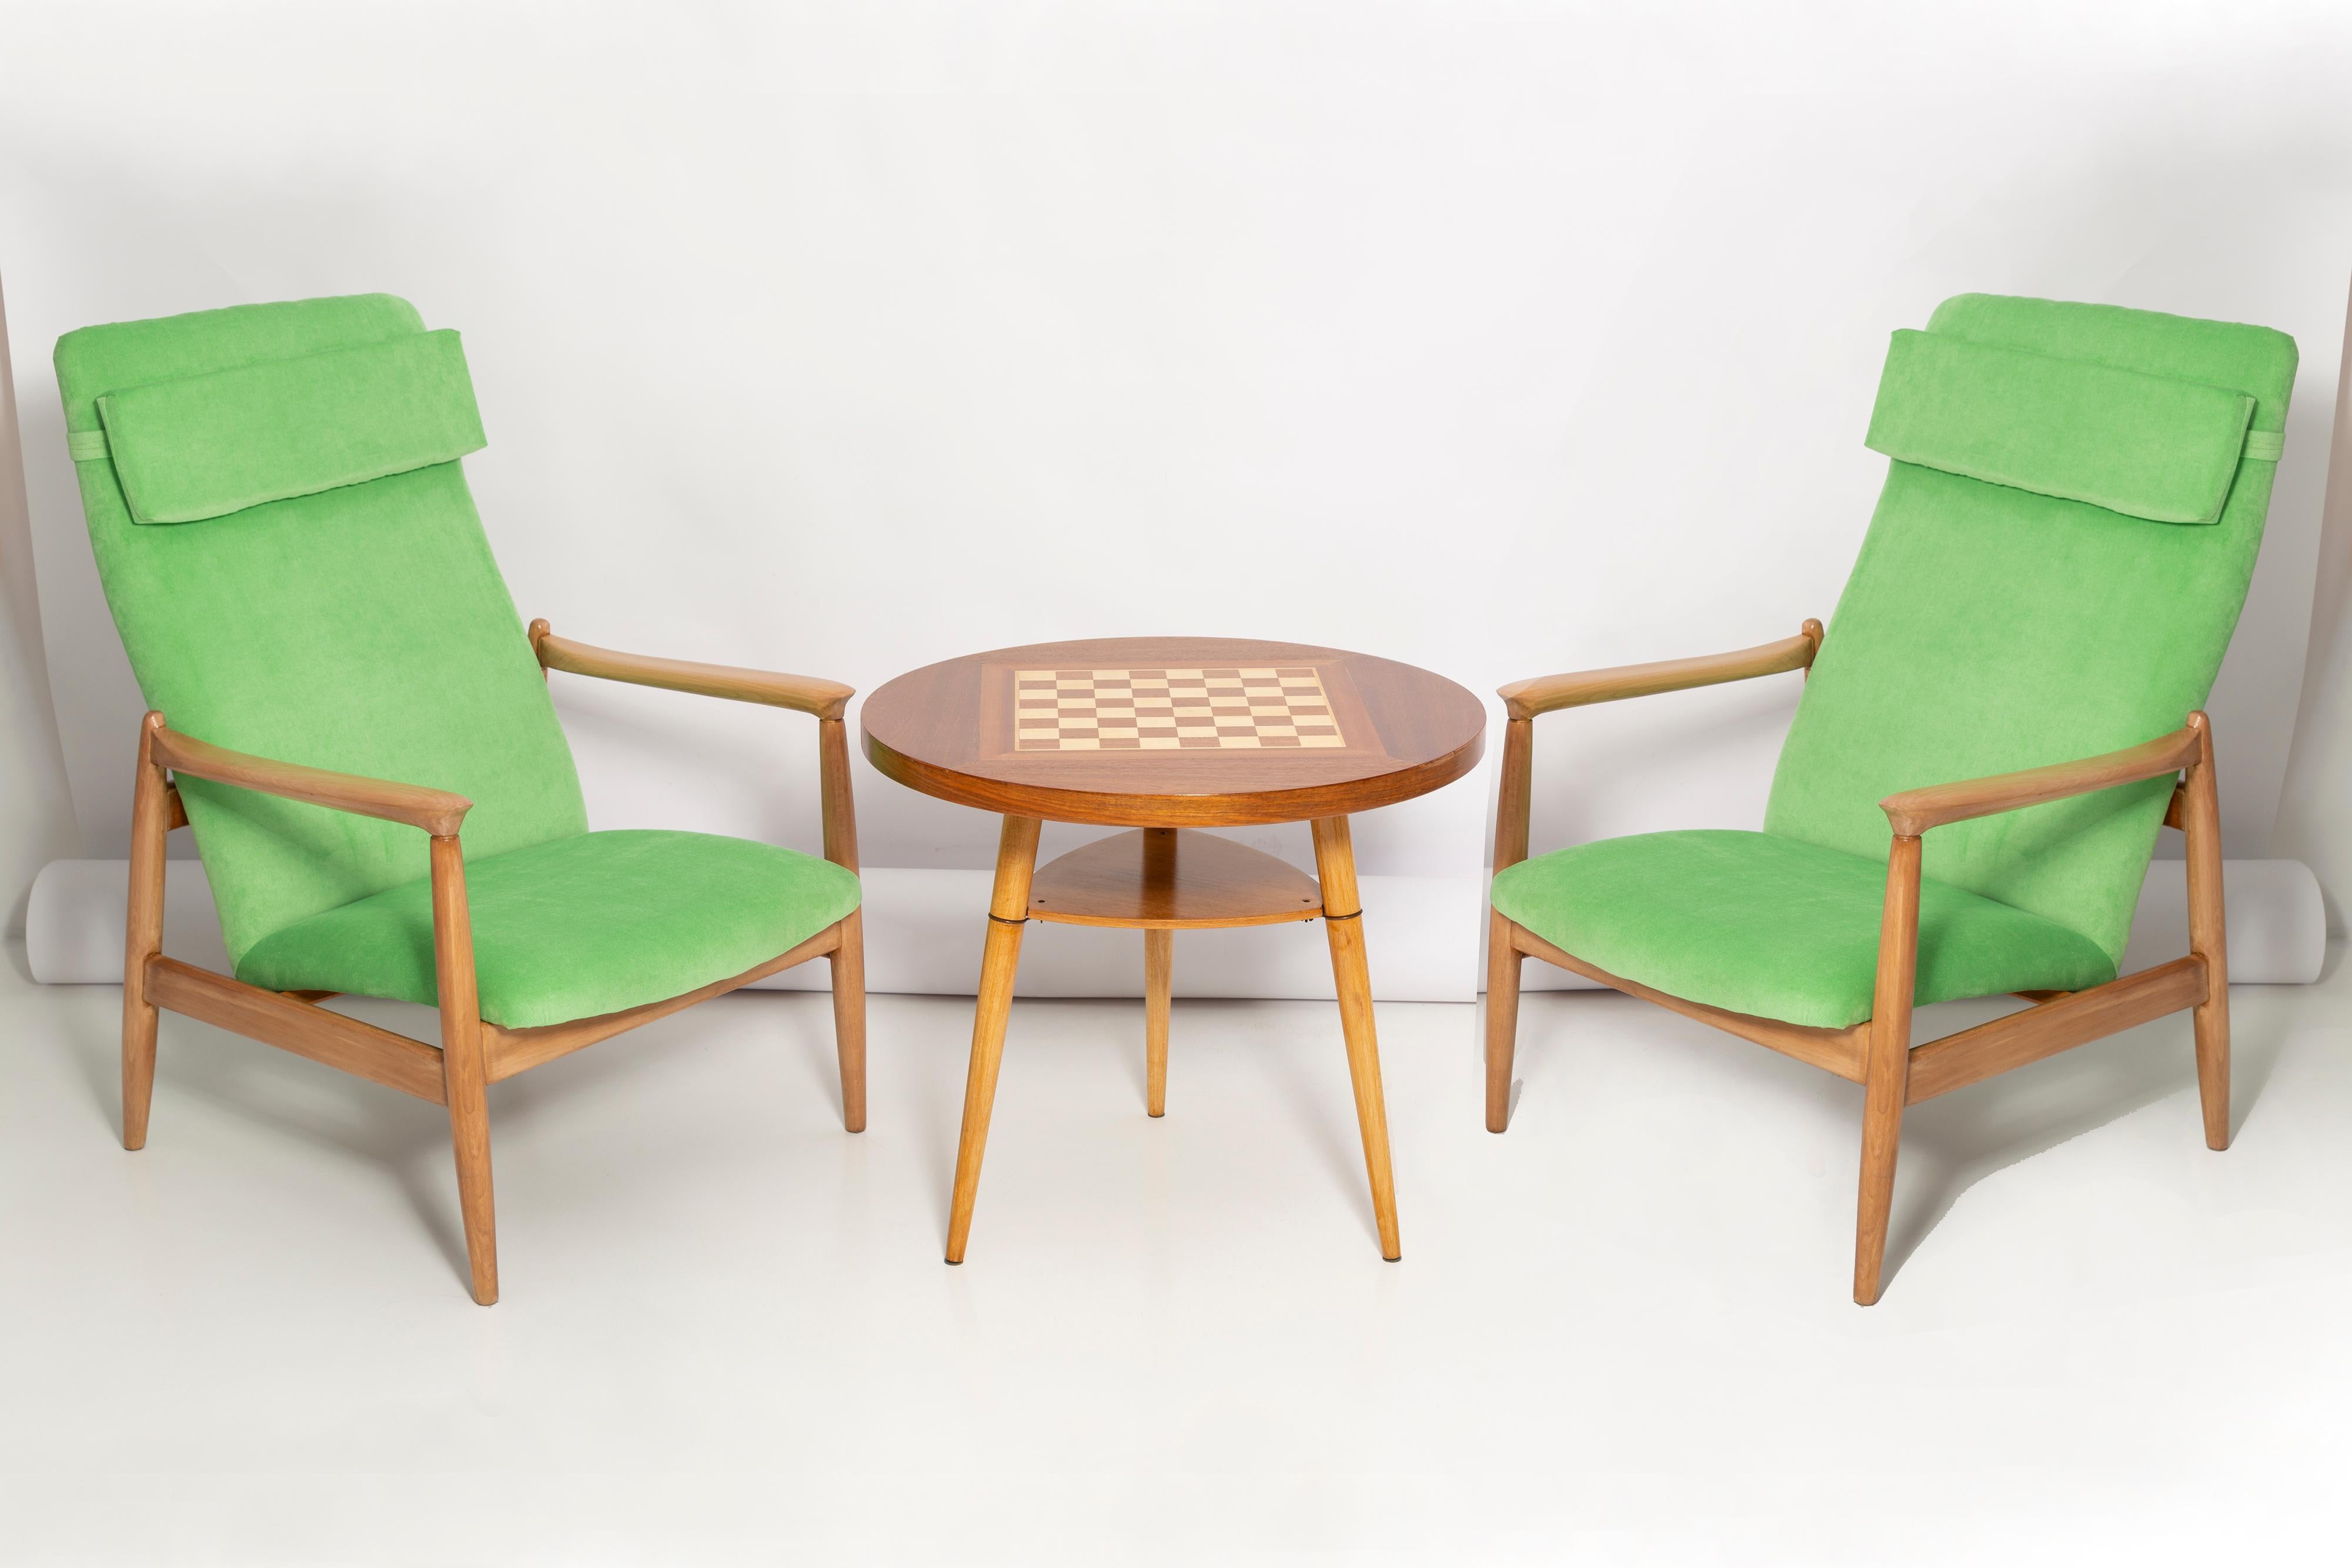 A pair of light lime green velvet armchairs, designed by Edmund Homa, a Polish architect, designer of Industrial Design and interior architecture, professor at the Academy of Fine Arts in Gdansk. The armchairs were made in the 1960s in the